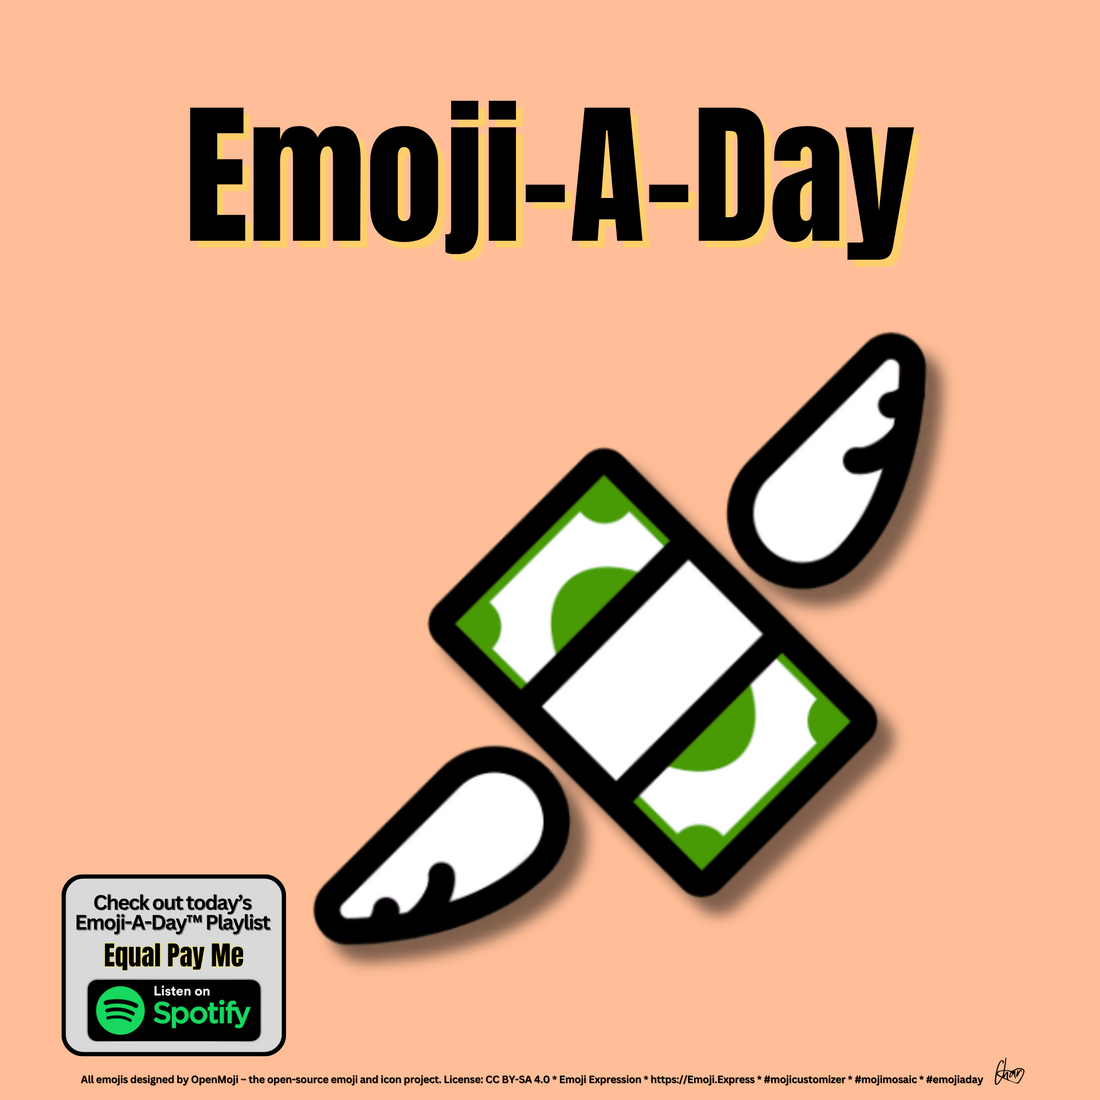 Emoij-A-Day theme with Money with Wings emoji and Equal Pay Me Spotify Playlist